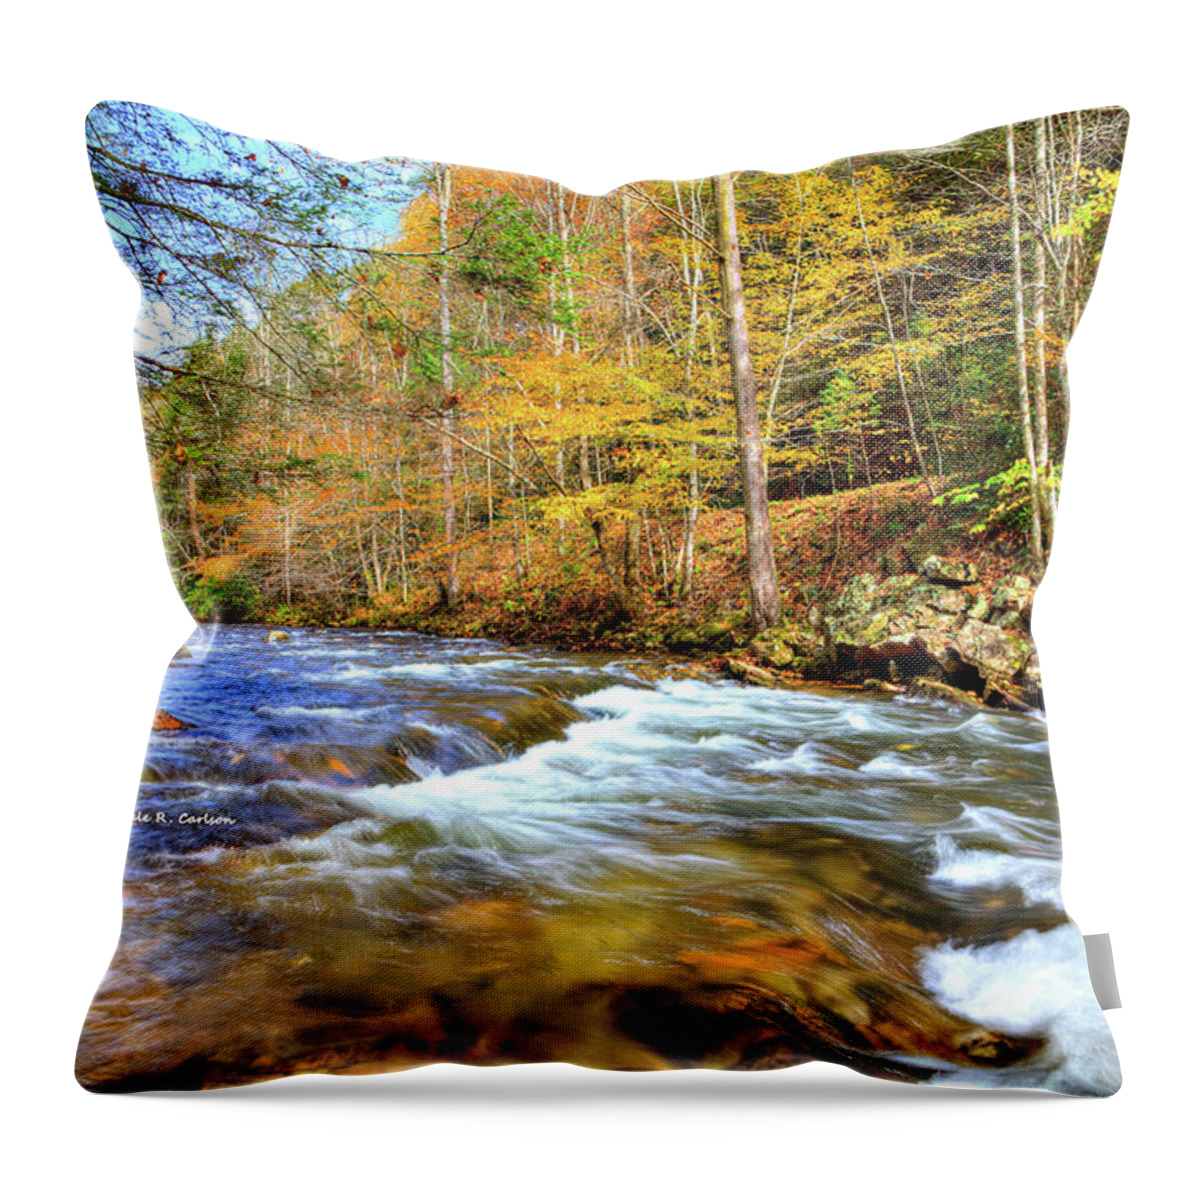 Fall Throw Pillow featuring the photograph Whitetop Creek Autumn by Dale R Carlson